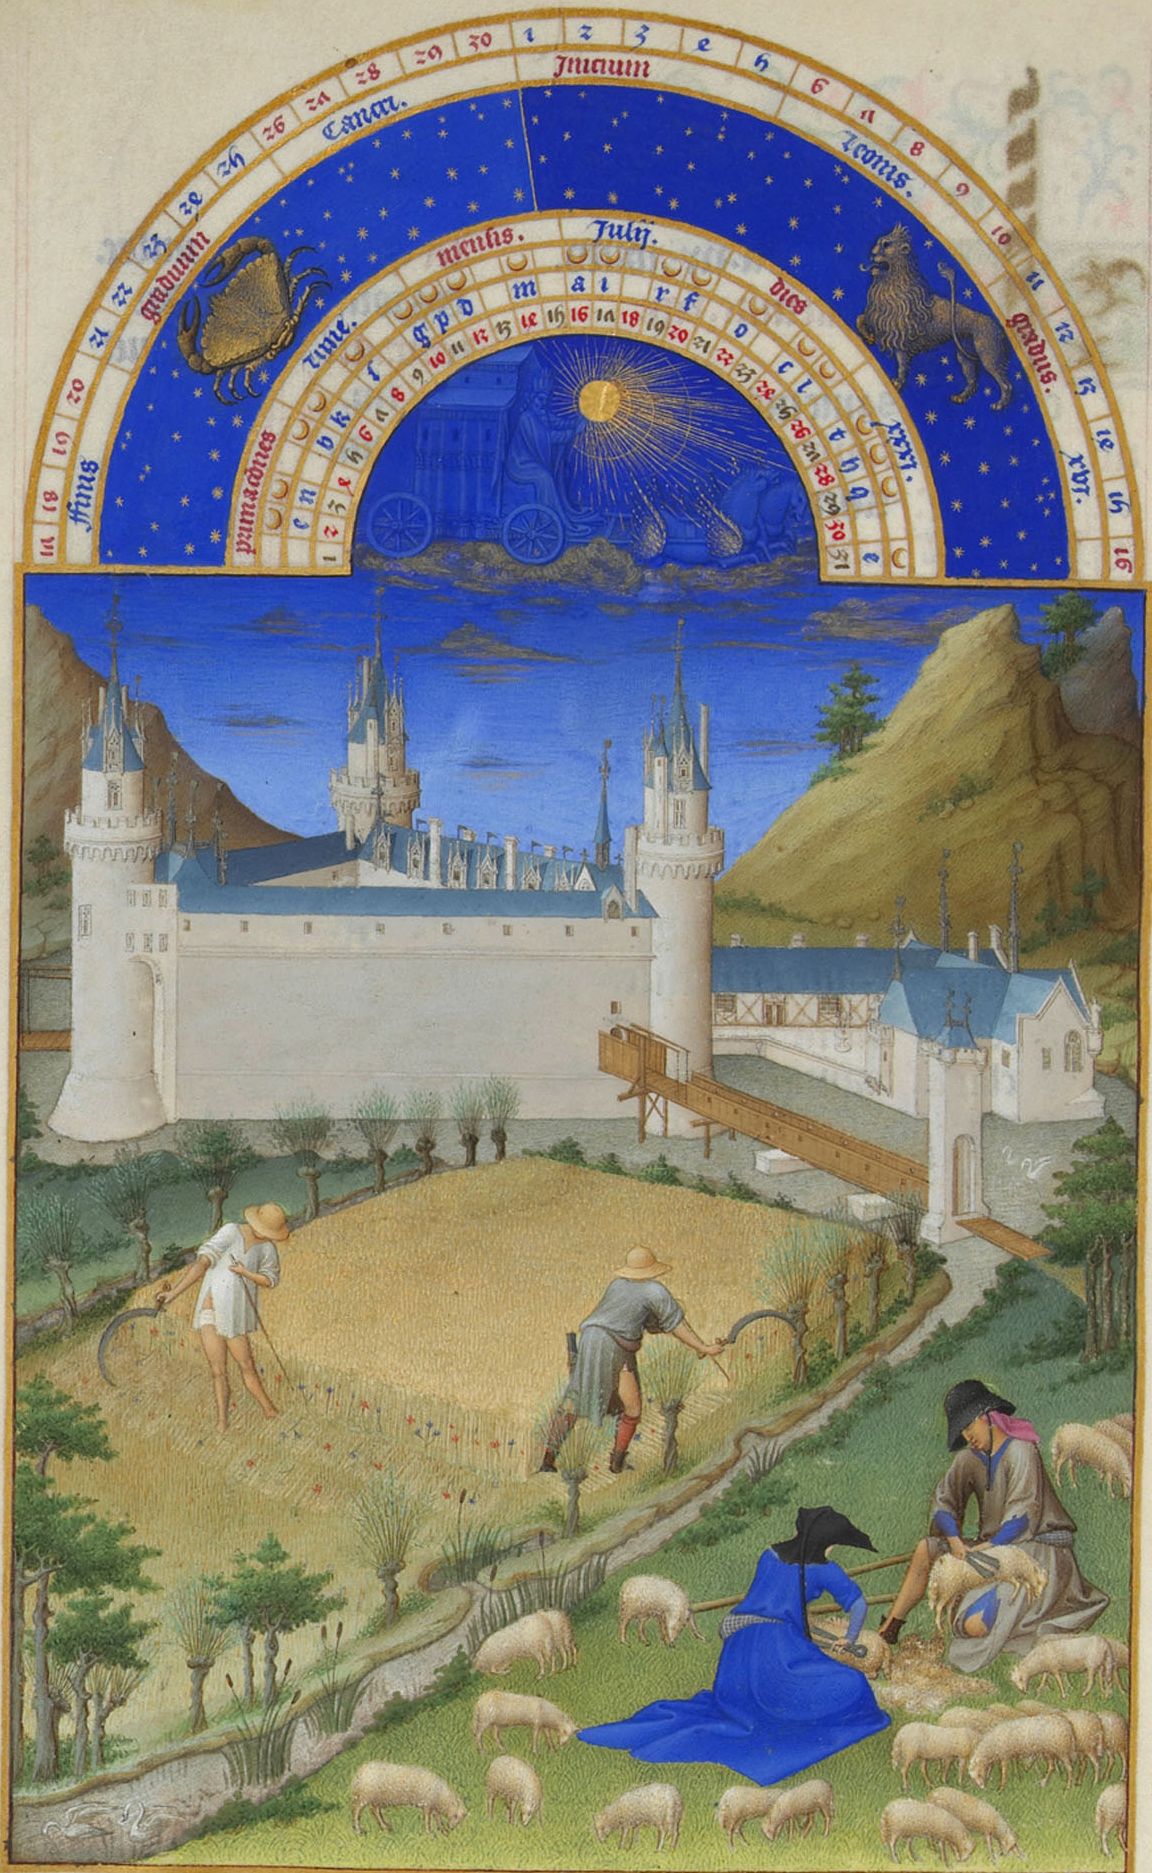 The Très Riches Heures du Duc de Berry (English: The Very Rich Hours of the Duke of Berry) or Très Riches Heures, was created between c. 1412 and 1416 for the extravagant royal bibliophile and patron John, Duke of Berry, by the Limbourg brothers.